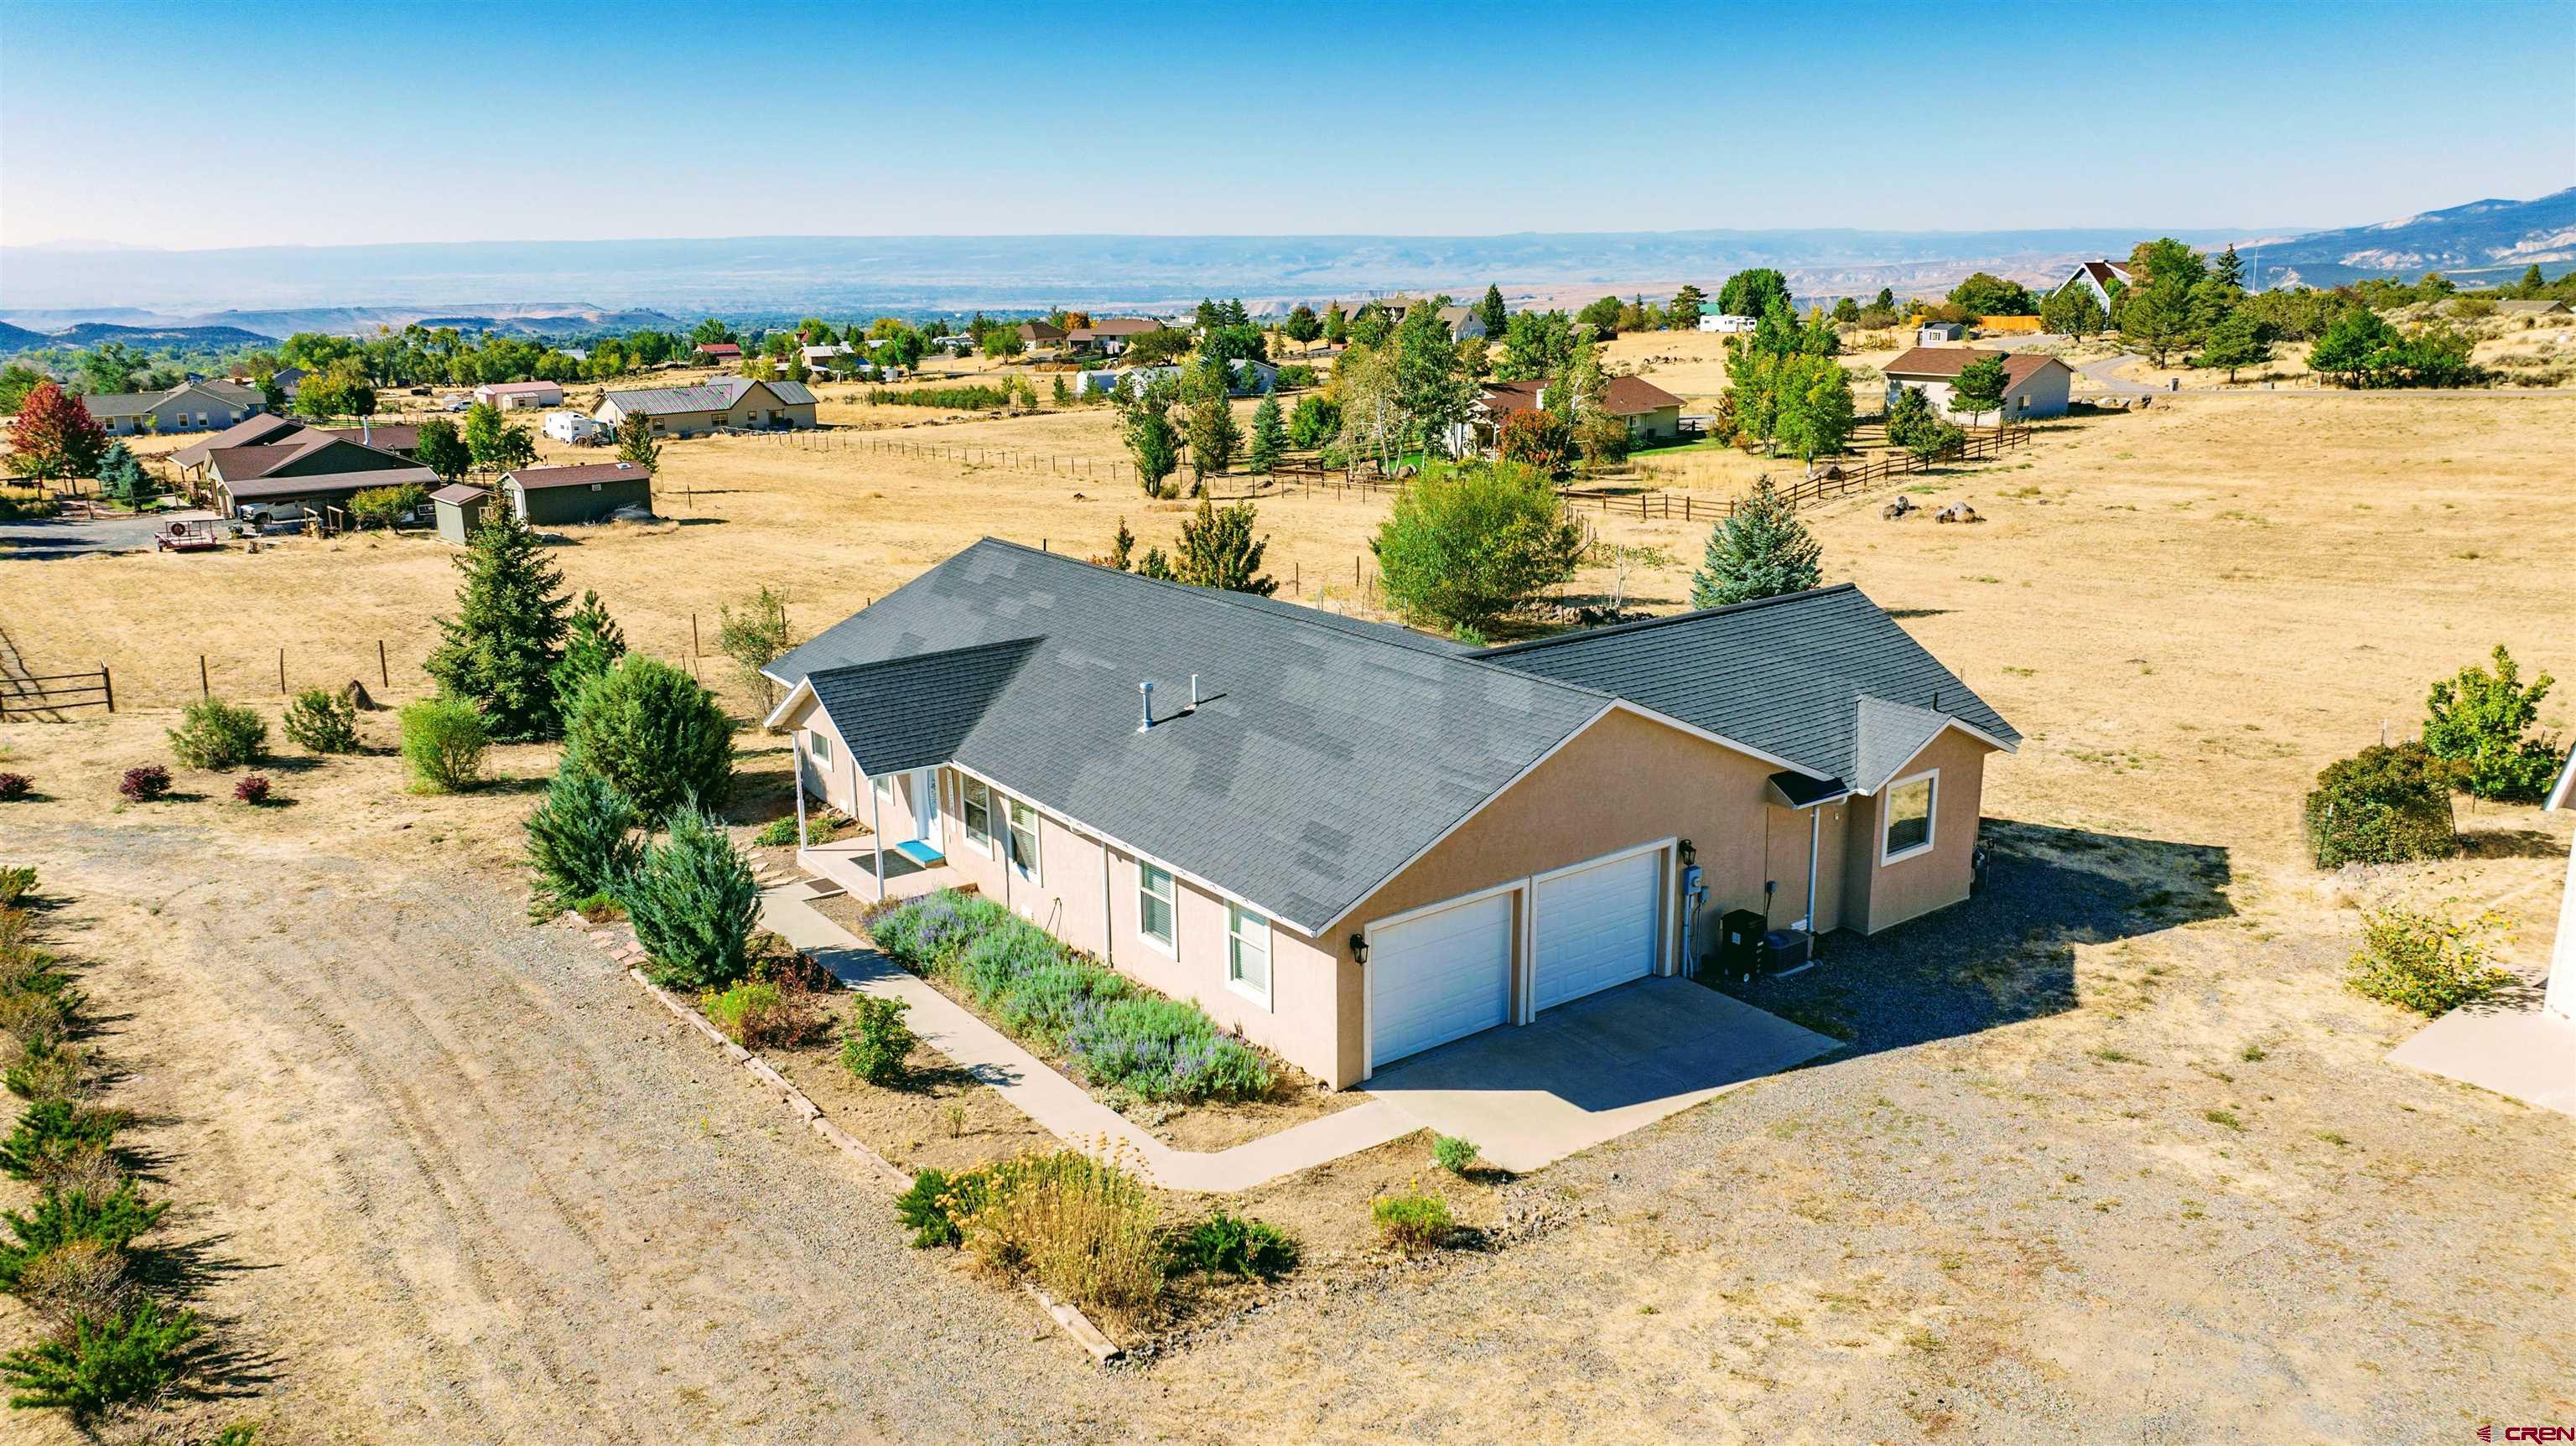 HERE IT IS! LOVELY RANCH HOME + GARAGE/SHOP BUILDING WITH SPACIOUS GUEST STUDIO APARTMENT ON 2.43 ACRES IN A SUPER CEDAREDGE LOCATION WITH VIEWS! This may be the Exact Property you have been Looking For! This is a Very Attractive 1-Level 1817 SF 3 Bedrm+Bonus Room/2 Full Bath Ranch Style Home that Features All New Vinyl Wood Plank Flooring, Wonderful Split-Bedroom, Open-Style Floorplan, Attached Finished 2-Car Garage & Delightful Back Patio with Gazebo. As if THAT wasn't Enough, the HUGE PLUS Here is the Large Additional 36’X28’ Heated Garage/Shop Building that Features a Very Spacious 900SF Studio Apartment Above. NOTE: The Total Square Footage of 2771 includes the 900 SF Studio Apartment. This Apartment, which can be Used for Guests or Additional Family Members is Fully Finished & Heated and Furnished, has a 3/4 Bath & a Natural Gas Log Stove for Extra Ambience, and Fabulous Views! The Amazing Lower Garage/Shop Part of the Building is Also Heated and Features its own Half Bath, an Insulated Storeroom Complete w/Shelves that can be used for Produce, Canned Goods or whatever else You Would Want to Keep in there. This Shop Building is Sided with Low-Maintenance Hardi-Plank Siding. Cycling Back to the Main Home, it Features Low-Maintenance Stucco Siding. The Huge Master Suite, Located at its Own Wing of the Home, includes its Own Door onto the Patio, a 6-Pc En-Suite Bath that features a Jacuzzi Tub, Huge Walk-In Closet & Radiant Heat in Addition to the Natural Gas Forced Air System that Heats the Entire Home. There is a Full Guest Bath on the Other End of the Home that Serves the Other 2 Bedrooms. This Beautifully Flowing Floorplan also Encompasses a Large Entry Foyer, a Bonus Room (that can be used for either a Separate Dining Room or an Office or Den), an Open Design Kitchen/Living Room/Breakfast Nook or Great Room, with All Appliances and Charming Bay Window Area Breakfast Nook. Back to the Large Garage Shop Building, there is an Attached Carport and a Site-Built 12’x20’ Storage Shed on Concrete Slab Next to That As Well! This Property is Located in a Premium Country Location of Well Kept Homes just outside the Town Limits of the Charming Rural Mountain Valley Town of Cedaredge, Chocked Full of Culture, Art and All Amenities and is the Gateway to the Grand Mesa, the Largest Flat-Topped Mountain in the World, Covered with Lush Mountain Terrain with Tall Aspens & Evergreens and 300 Lakes & Reservoirs, which offers a Multitude of Adventures and Experiences for Enjoying Colorado Mountain Living, including Nordic Skiing, Downhill Skiing, Snowshoeing, Snowmobiling, ATV'ing, Camping Fishing, Hunting, Hiking , Biking & Bicycling! Folks, It Just Doesn’t Get Any Better Than This!